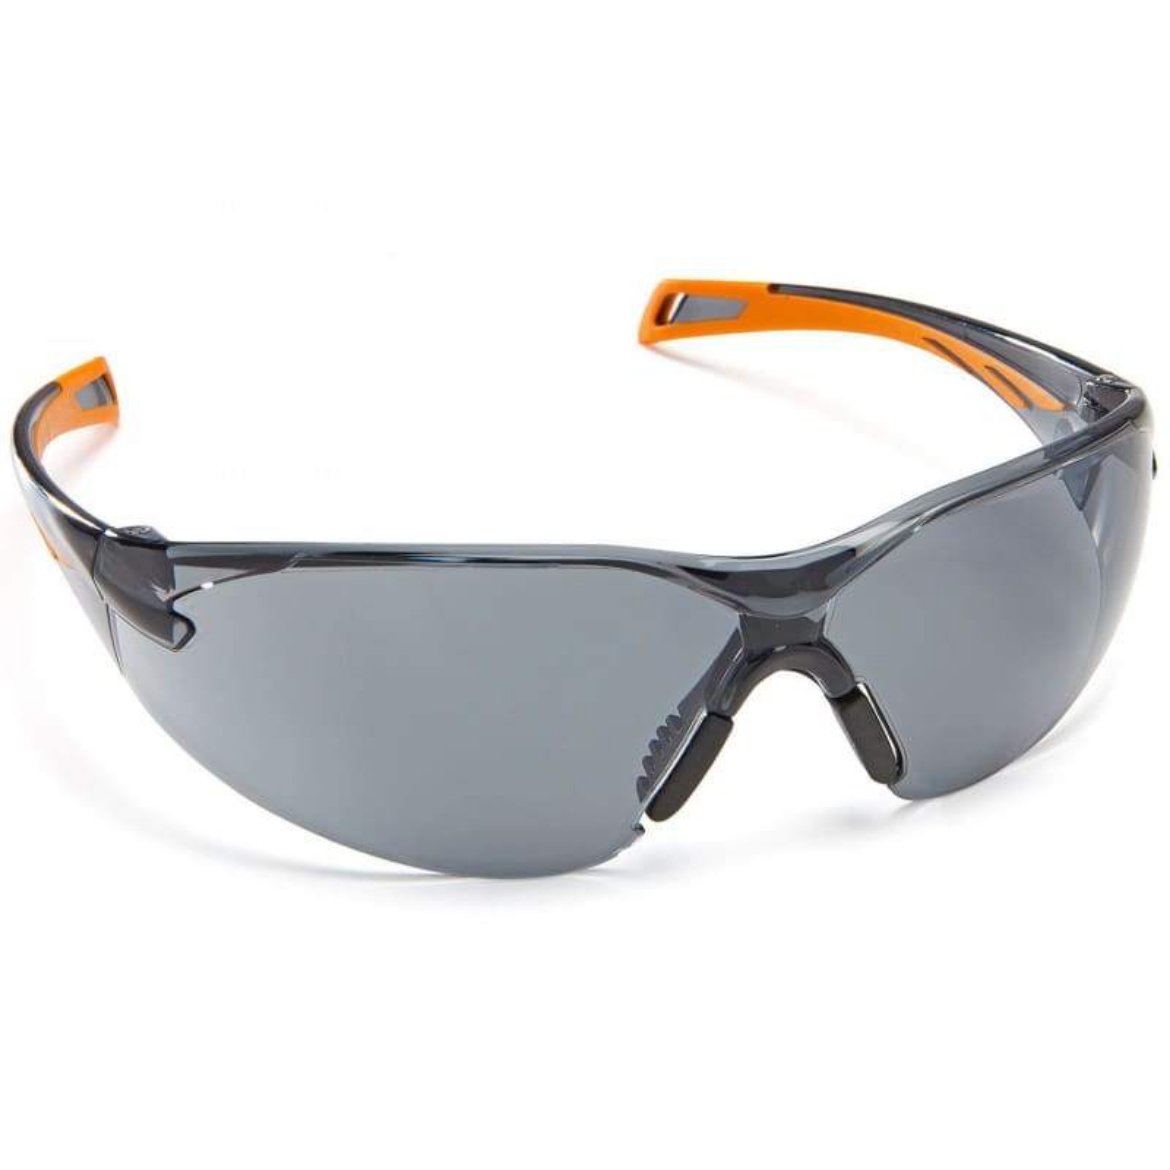 Picture of Force360 Runner Smoke Lens Safety Glasses